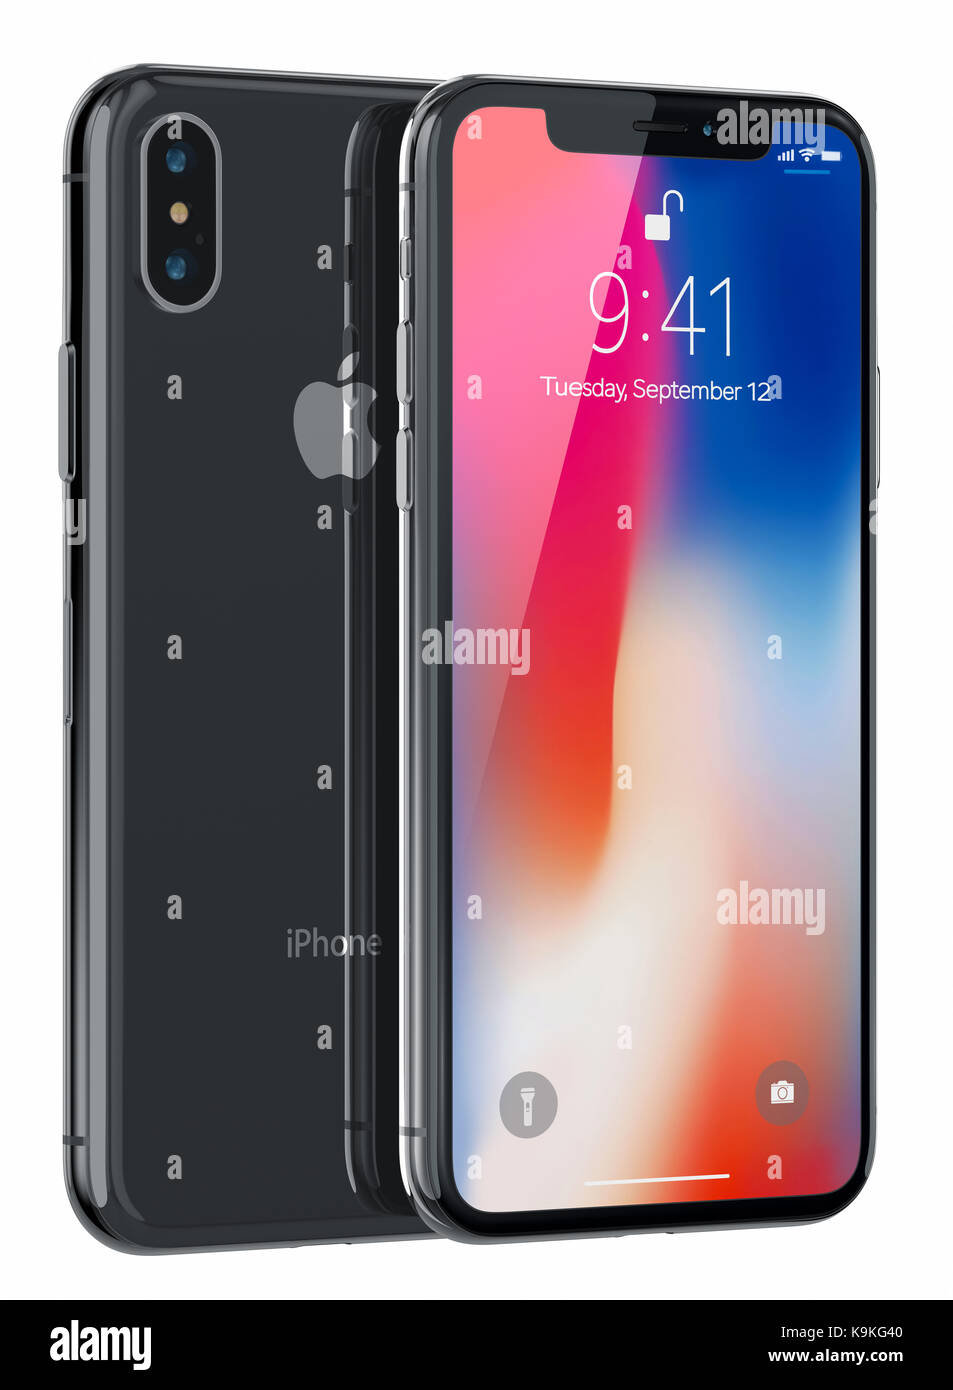 Galati, Romania - September 21, 2017: 3D Render of a New iPhone X (Ten) Illustrative Editorial Image, on white background. Stock Photo